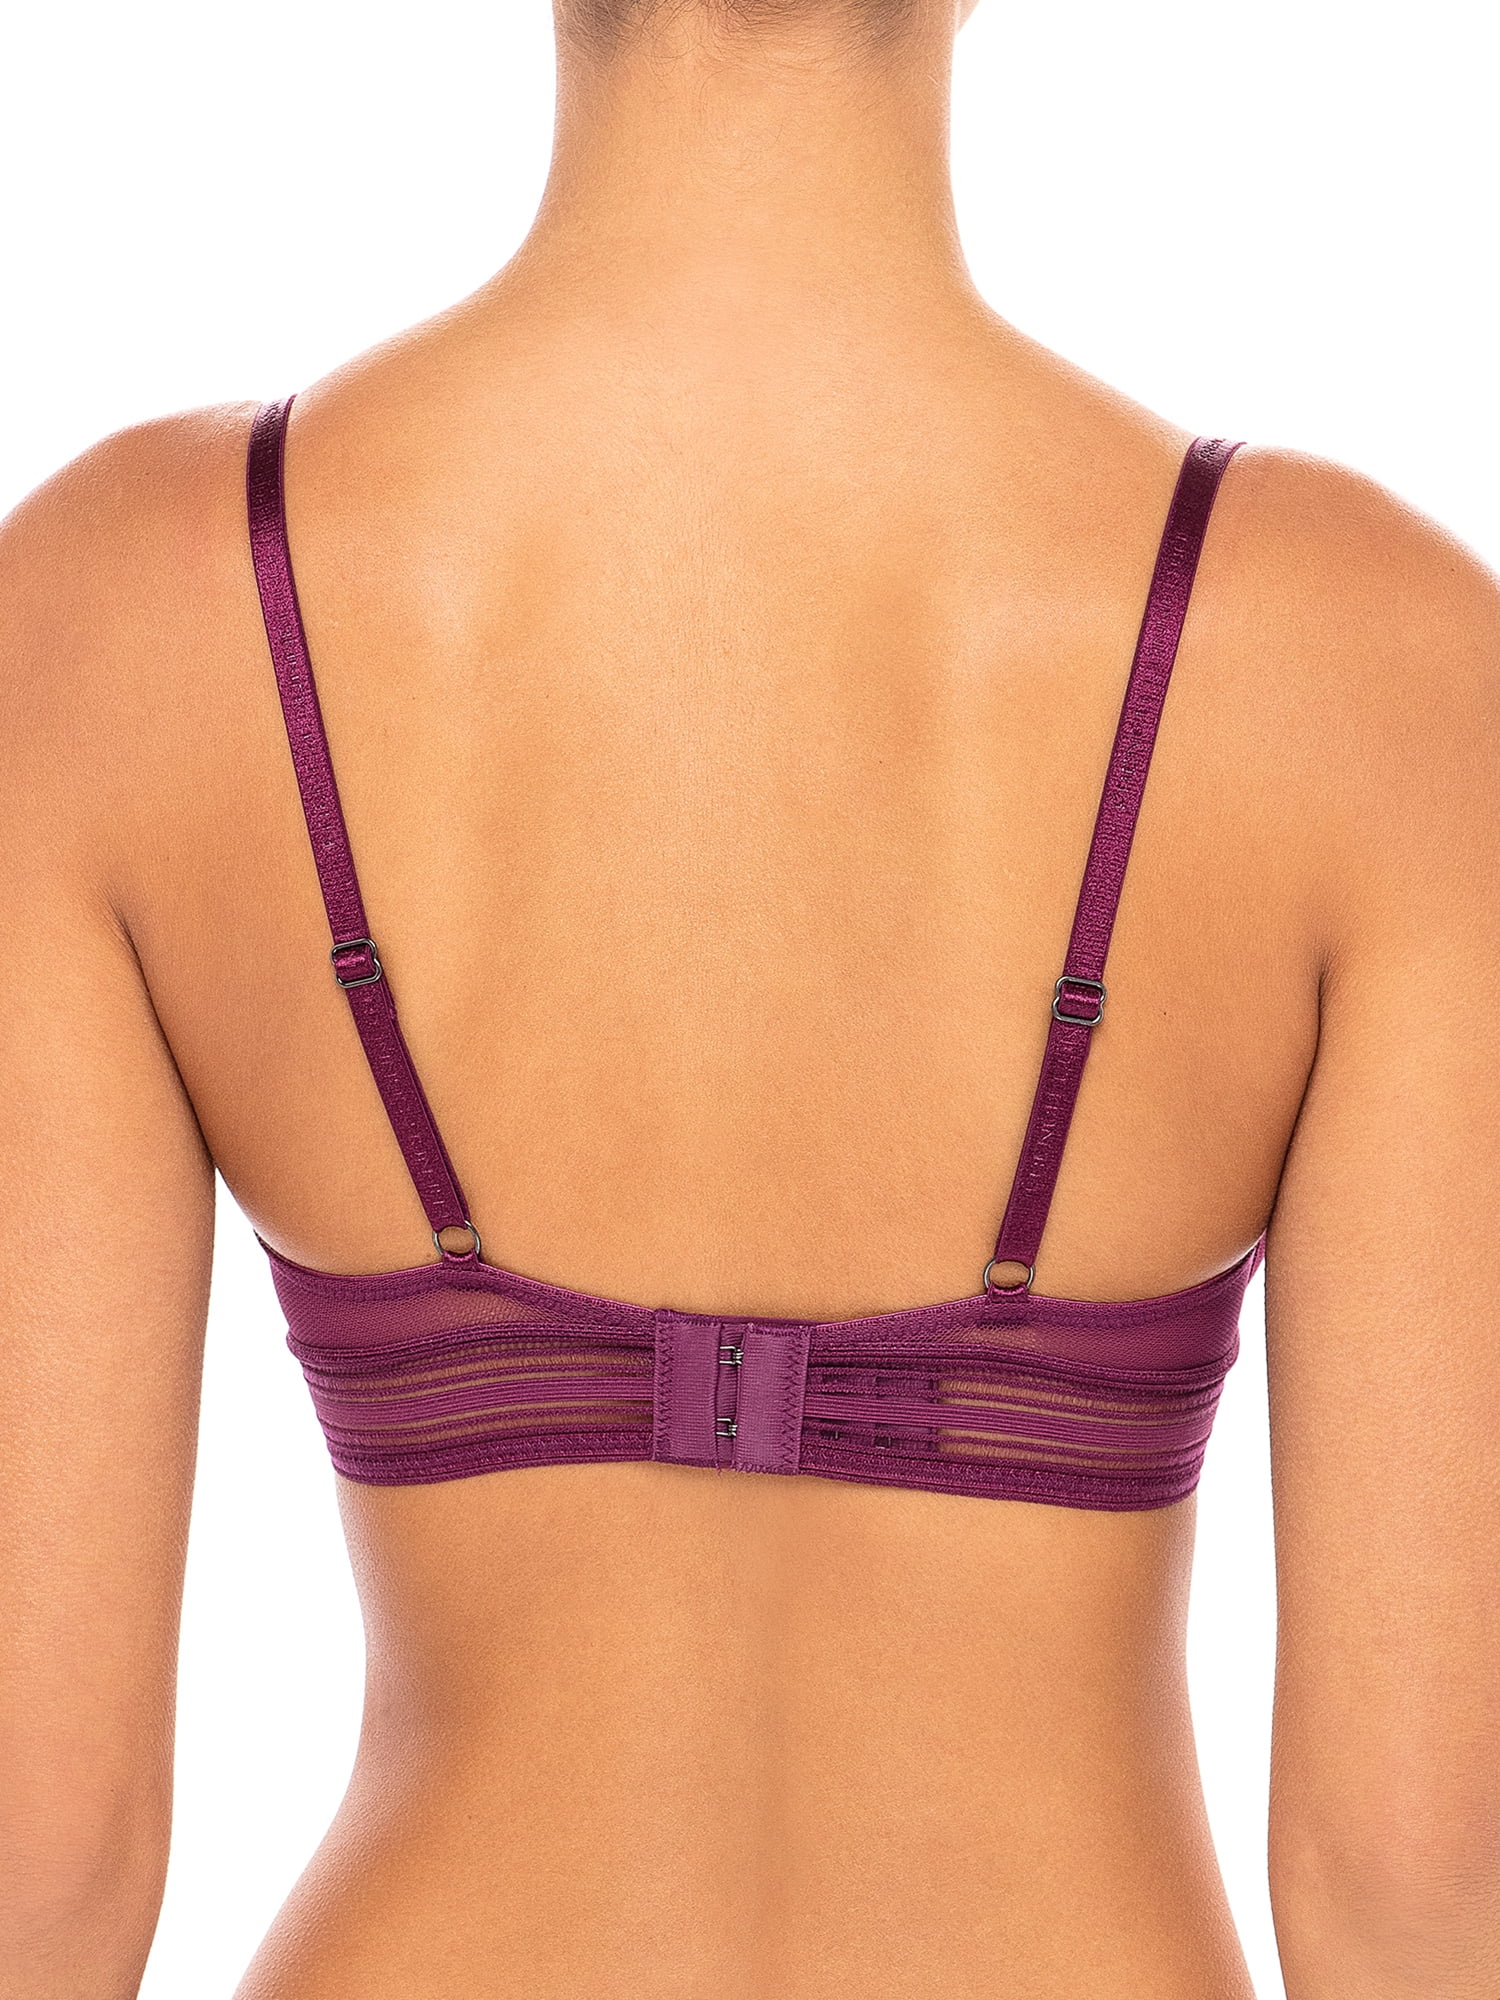 French Connection Lace Mix Unlined Demi Bra - Tornado